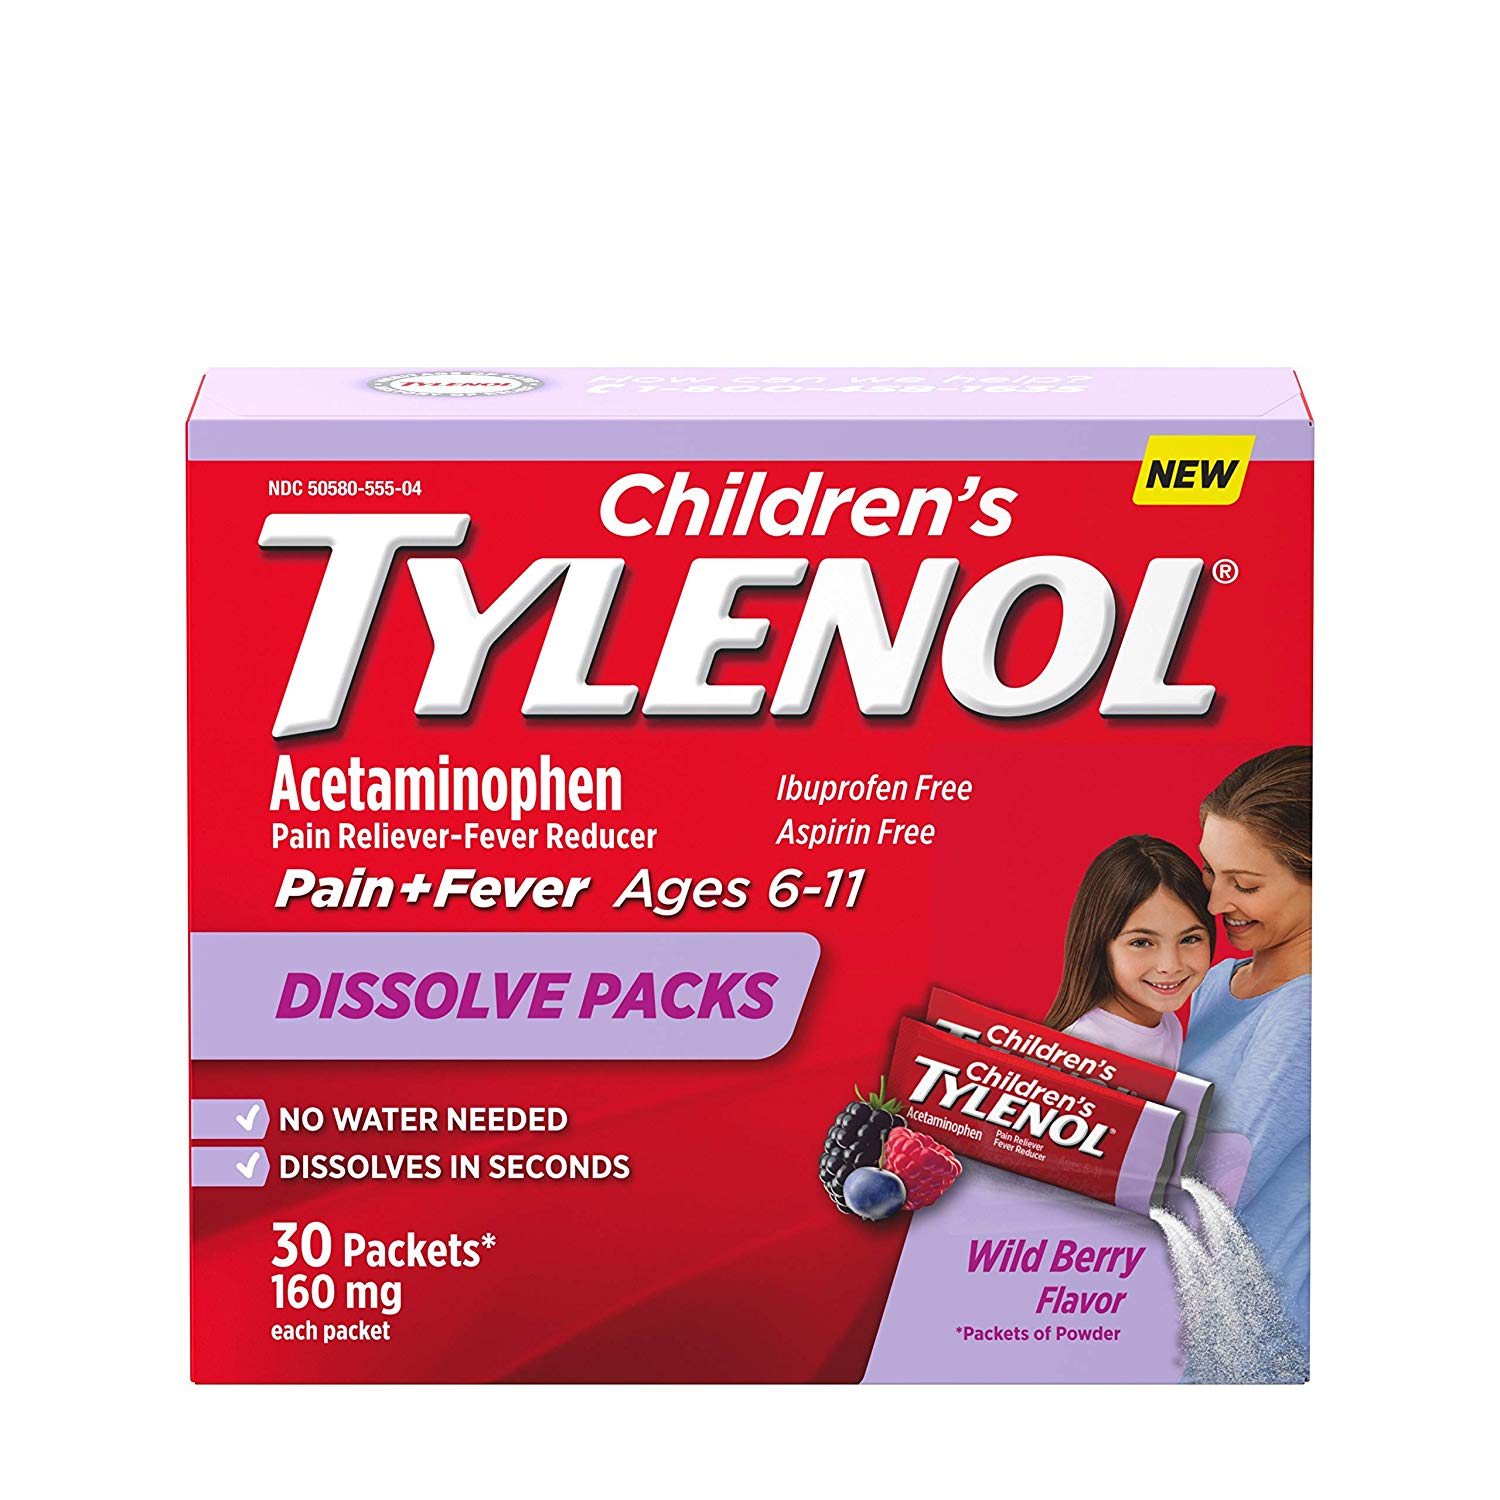 motrin or tylenol for cold